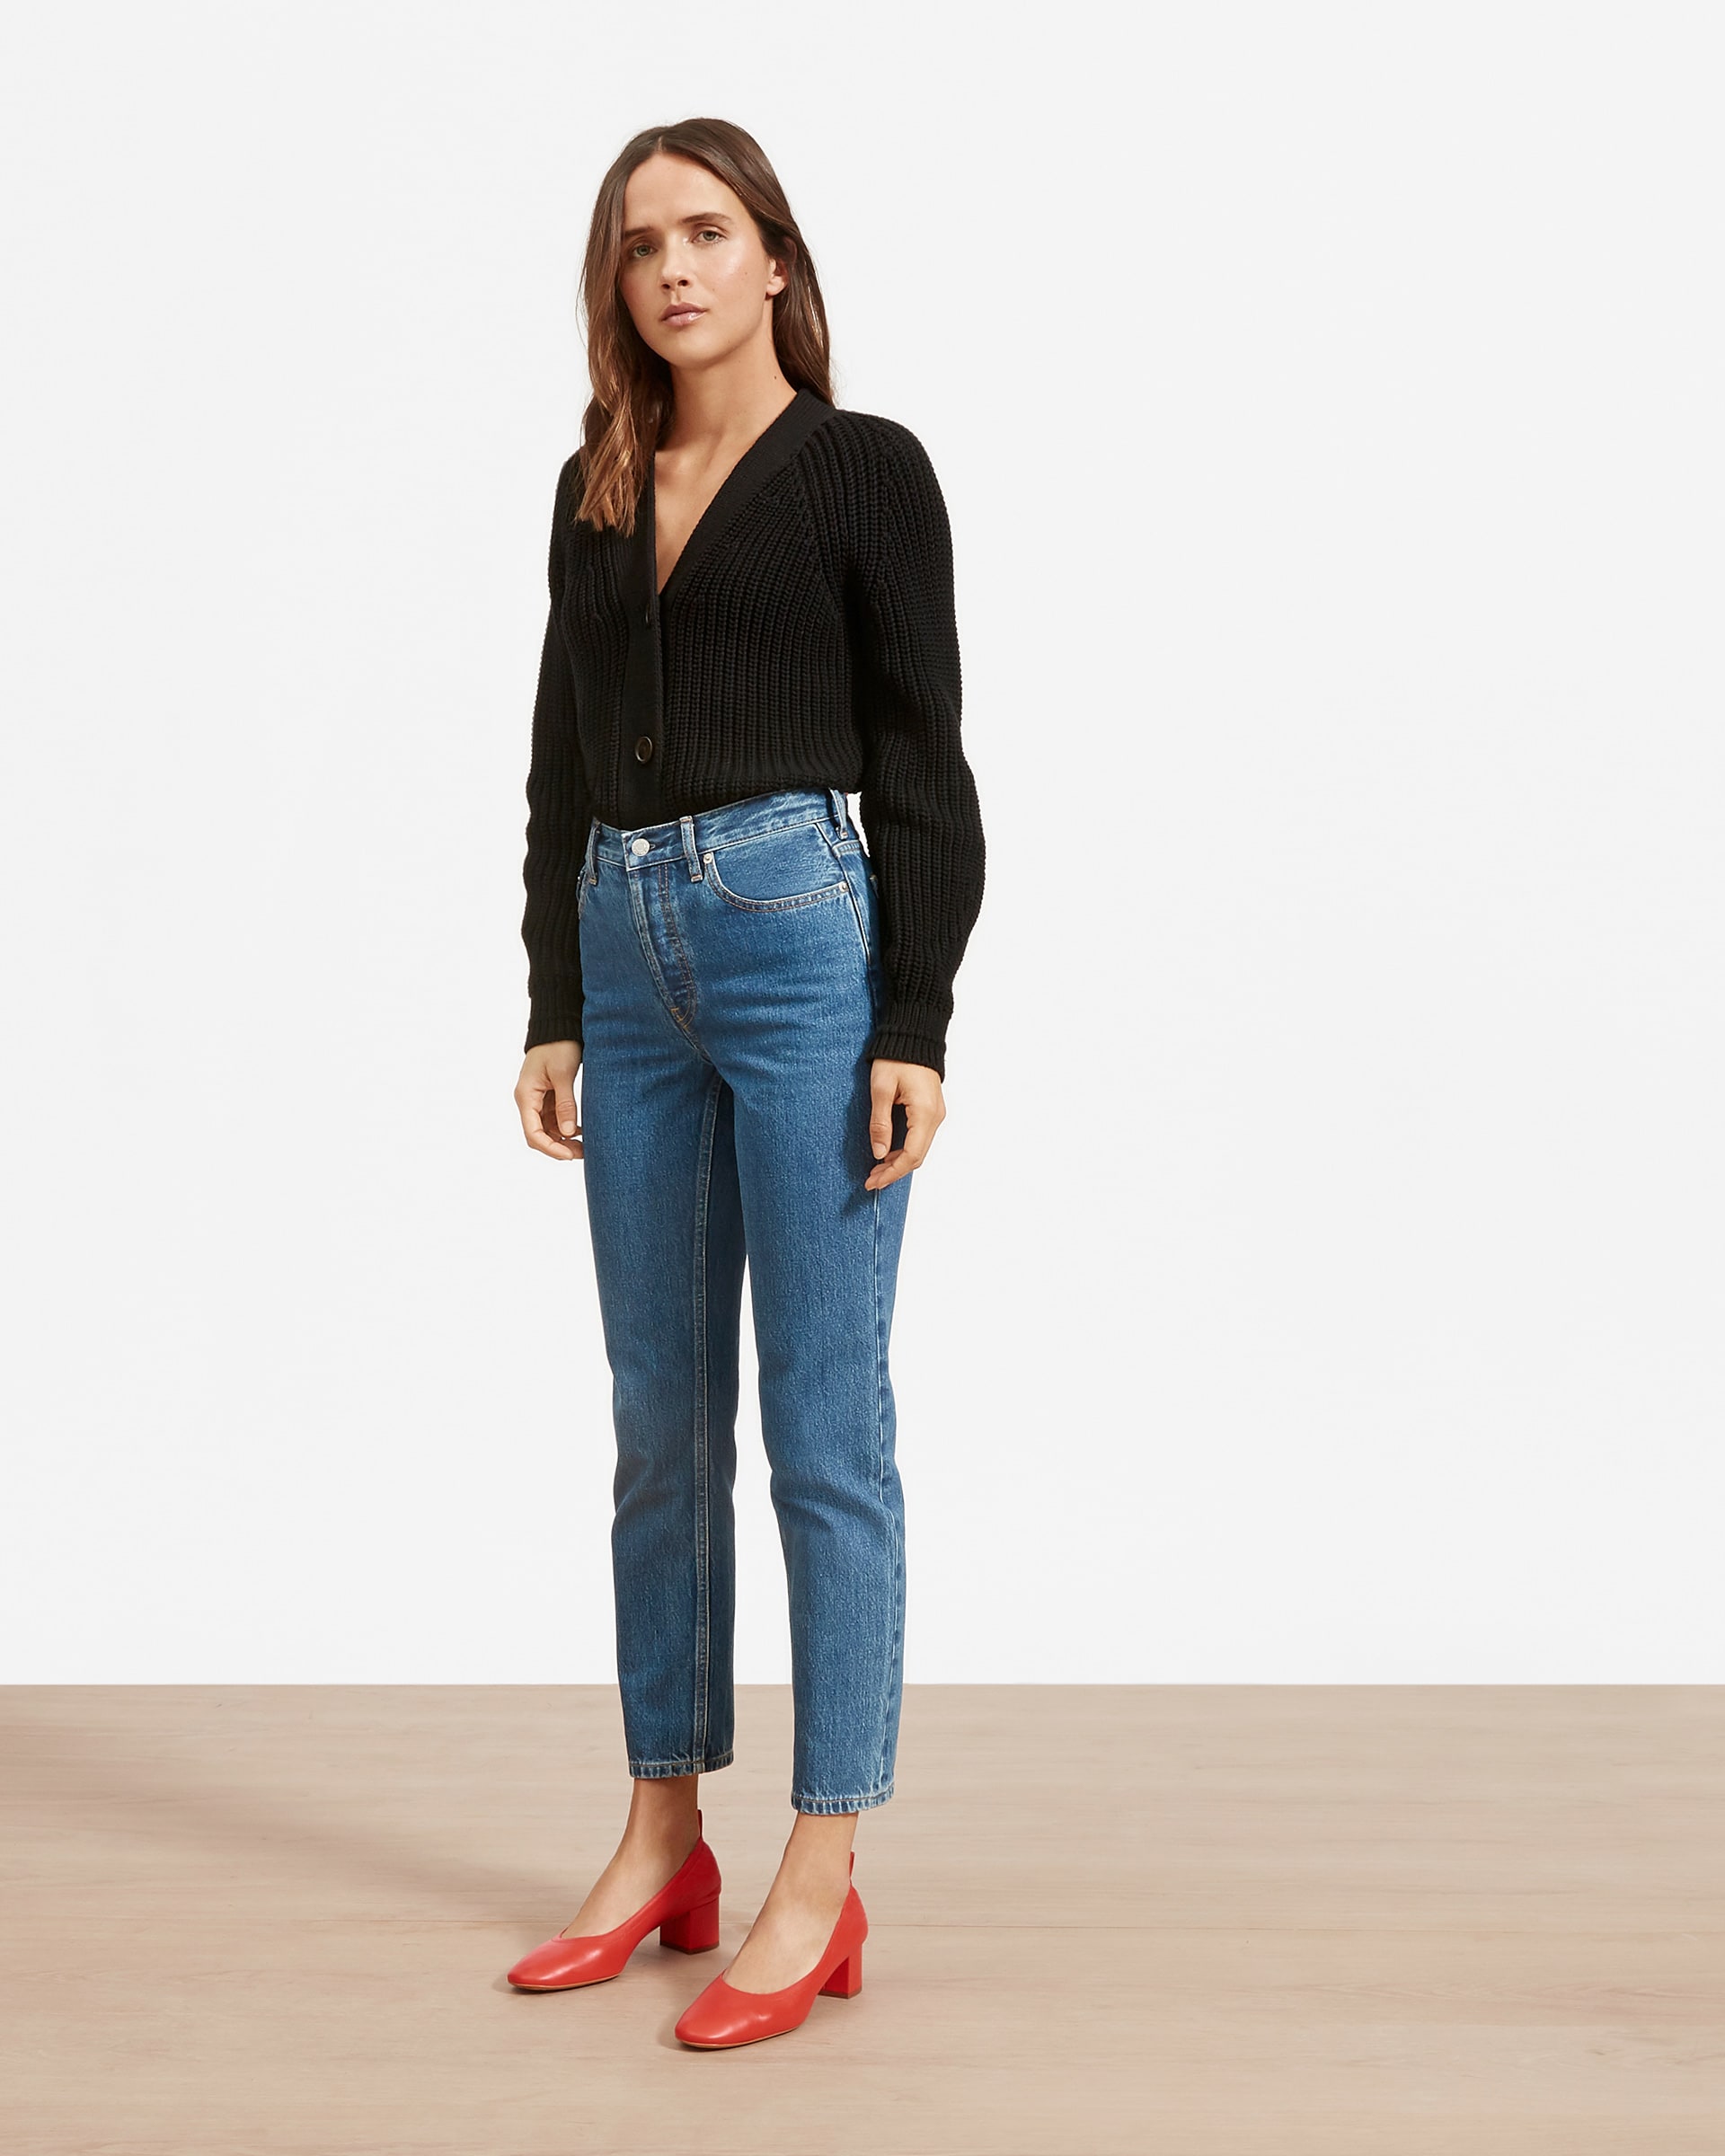 The Day Heel Bright Red – Everlane